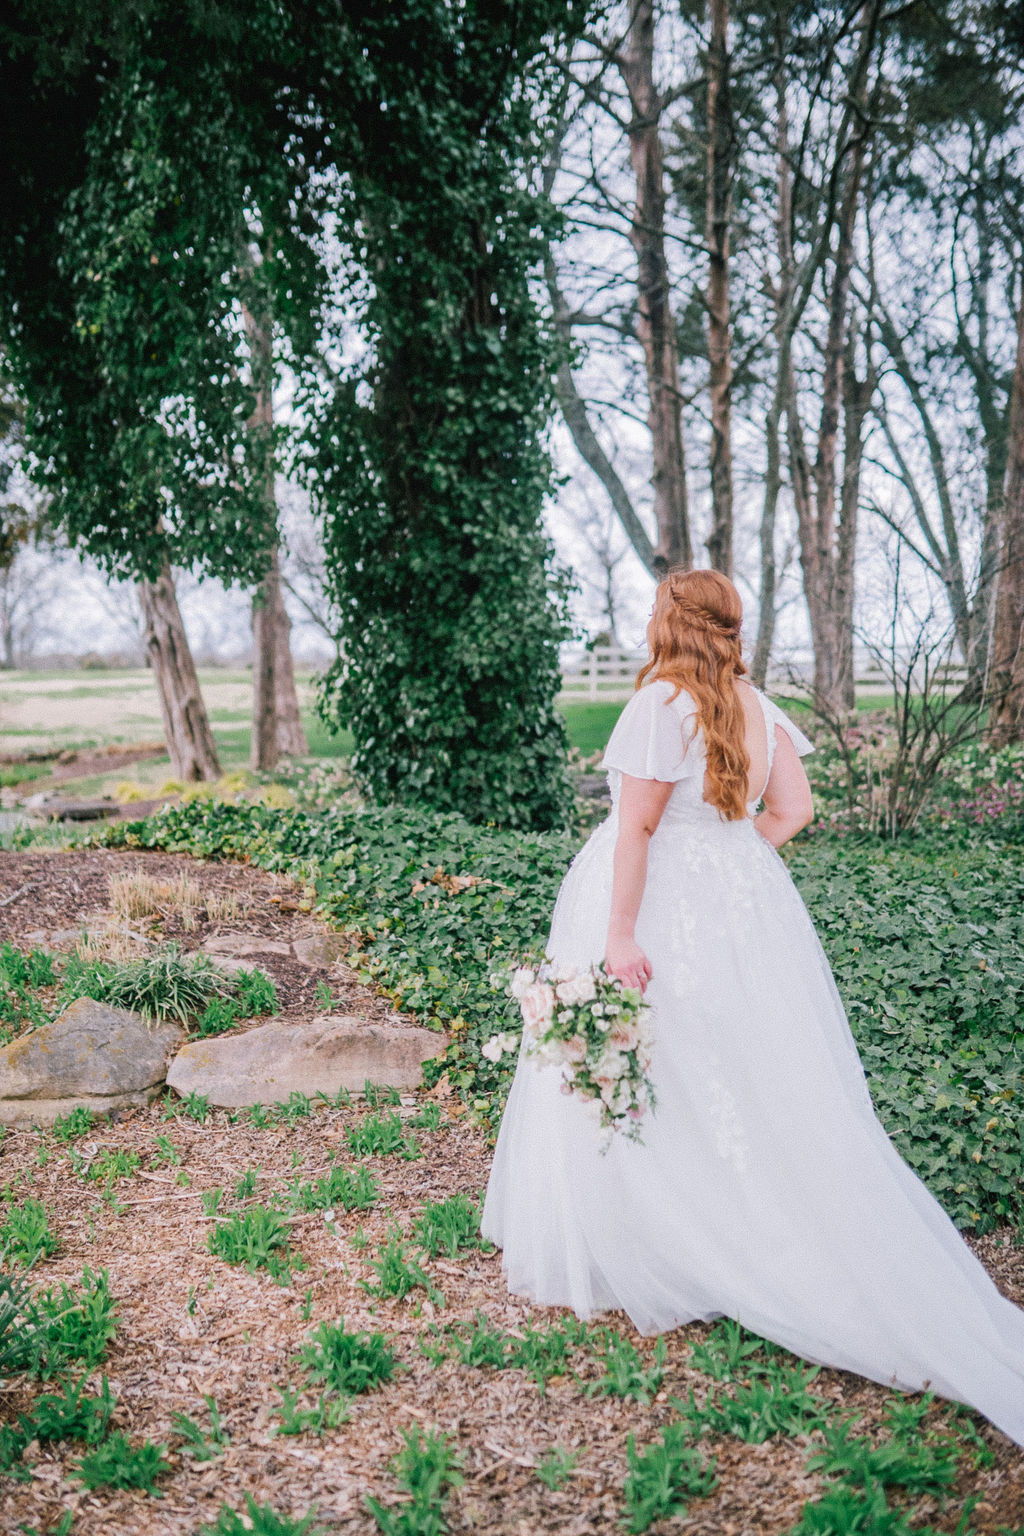 bride walking through a whimsical fairytale forest